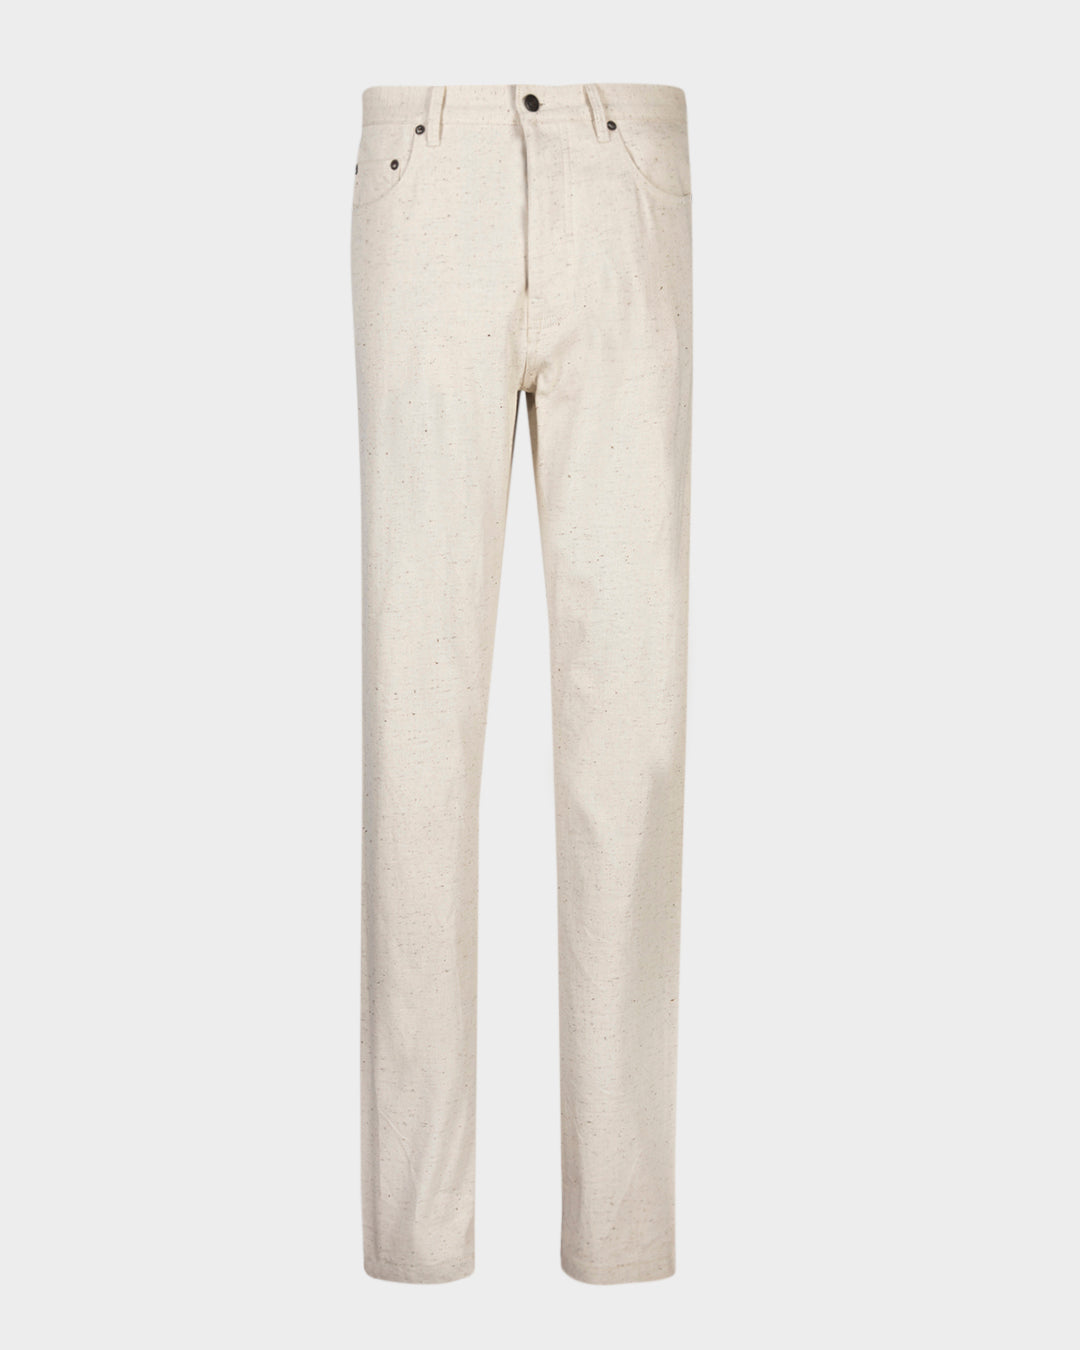 Front view of melange denim jeans for men by Luxire in ivory